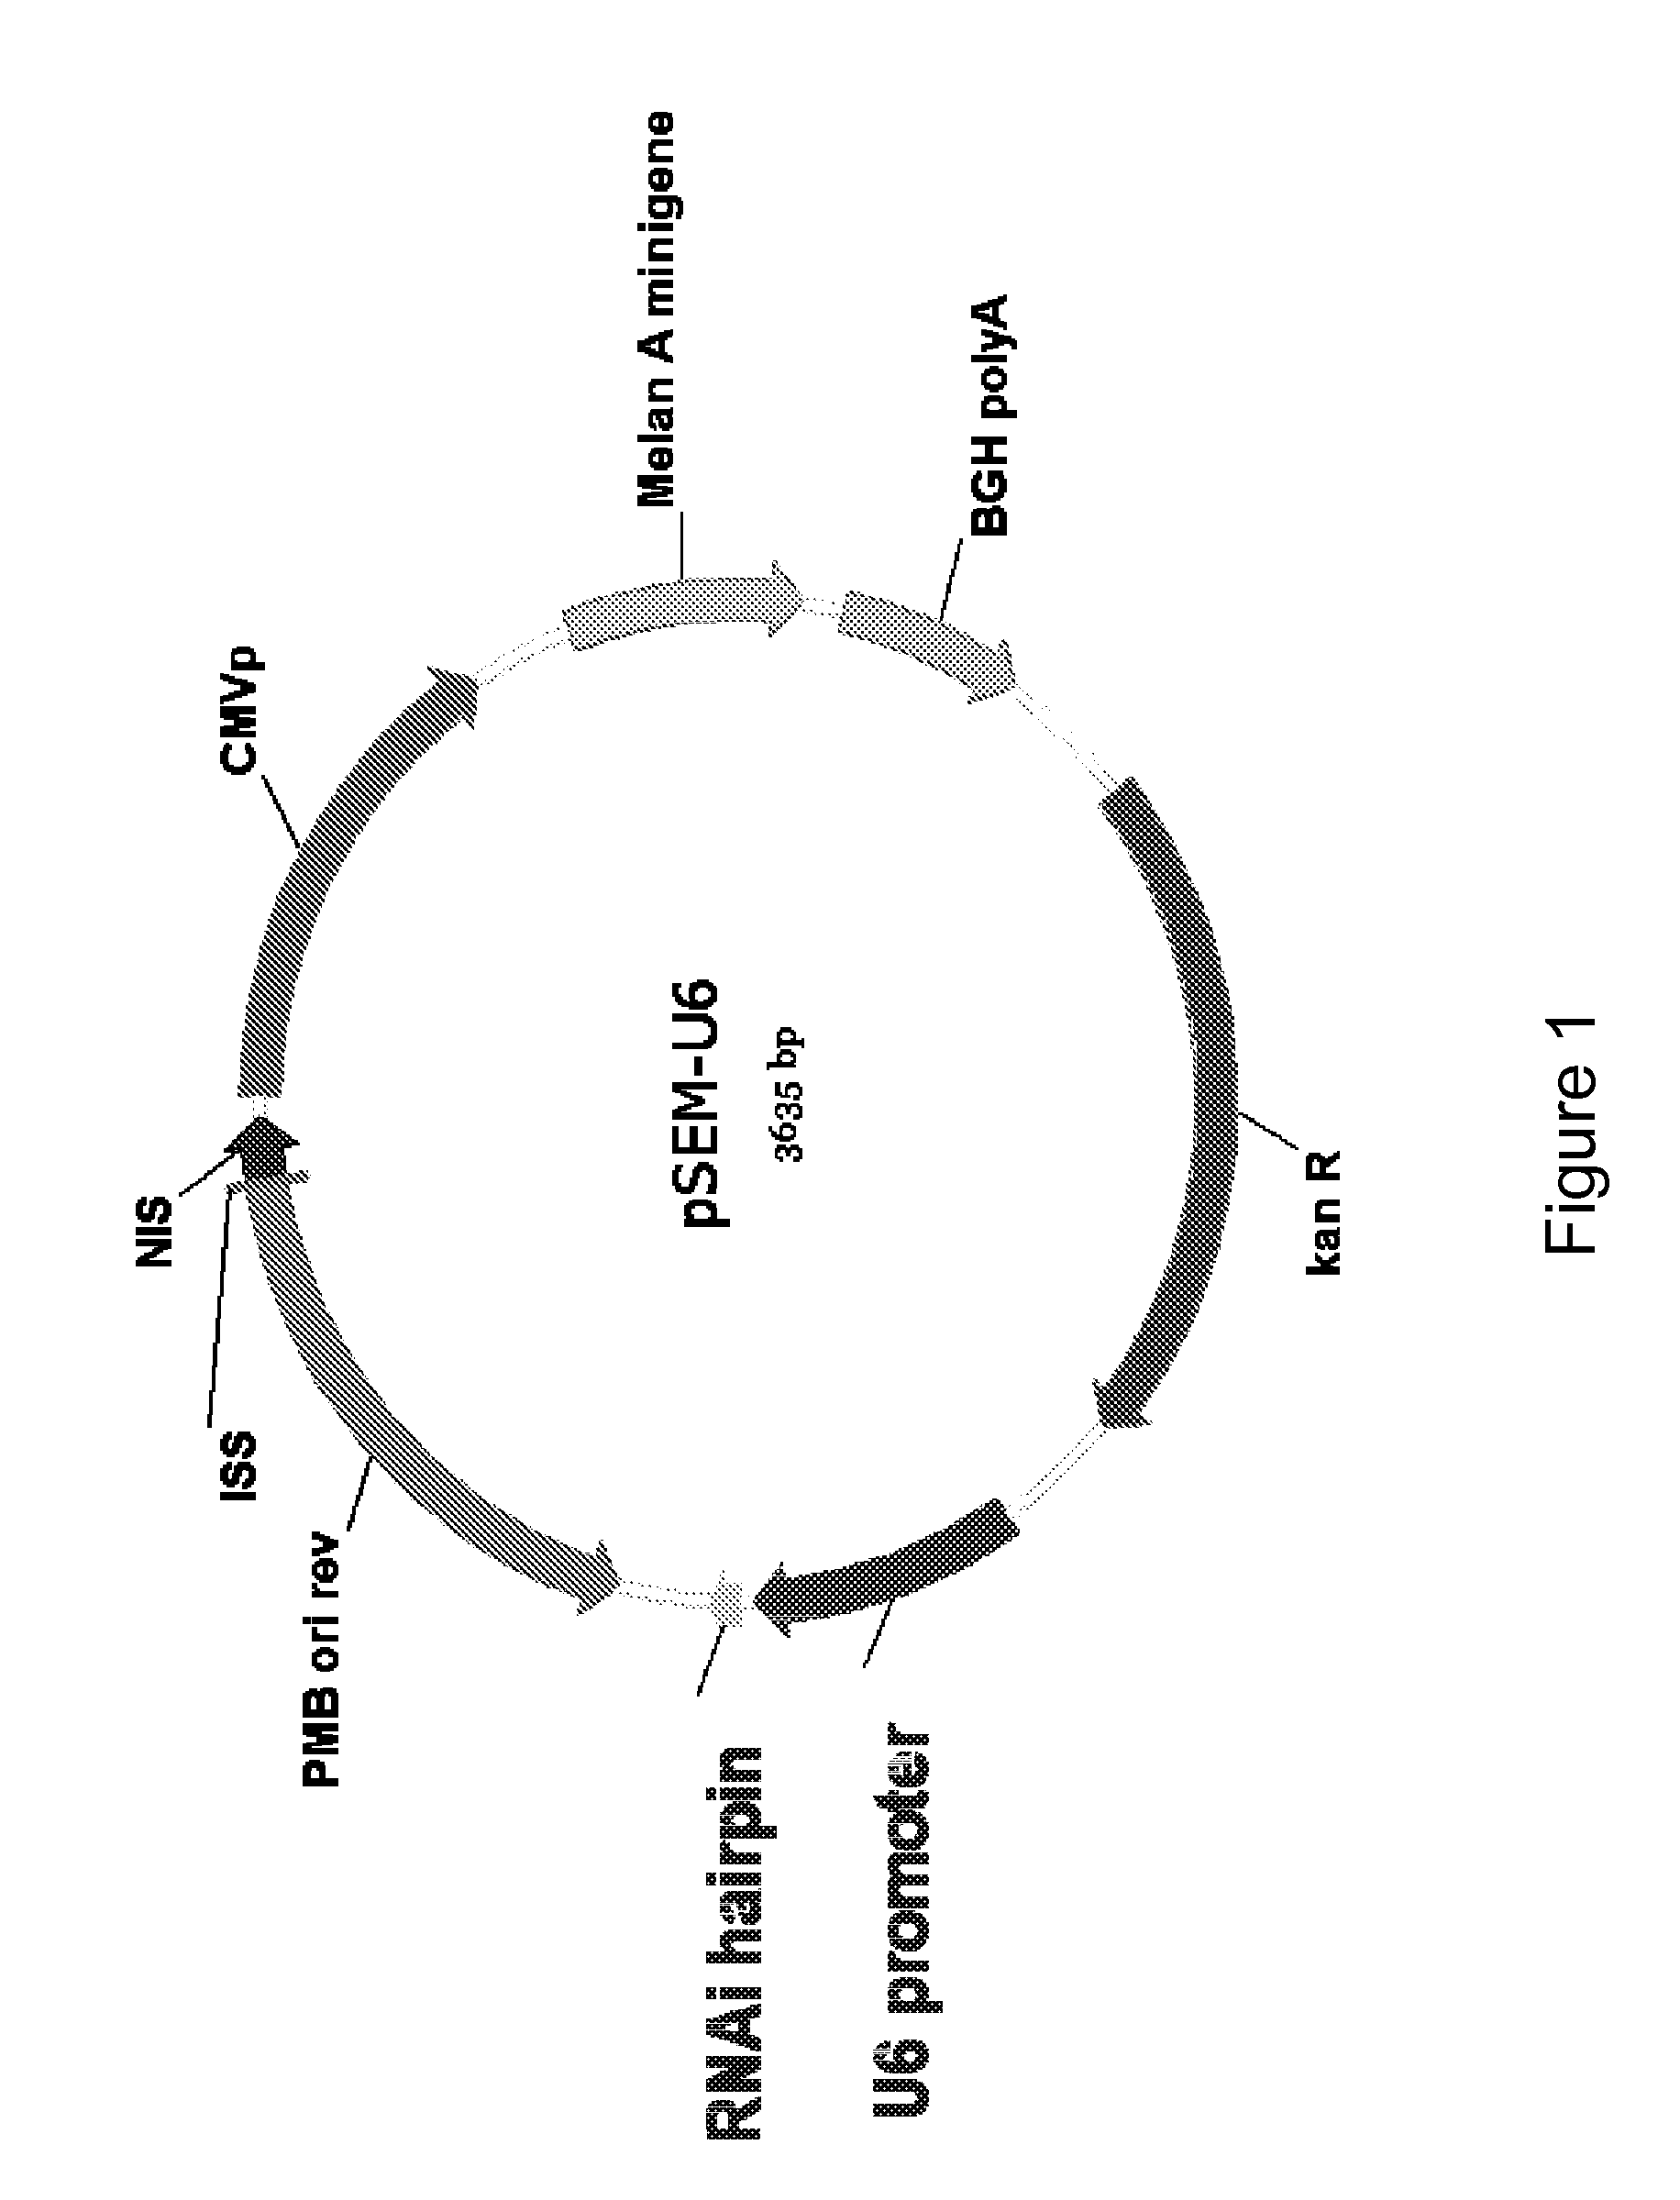 Multicistronic vectors and methods for their design